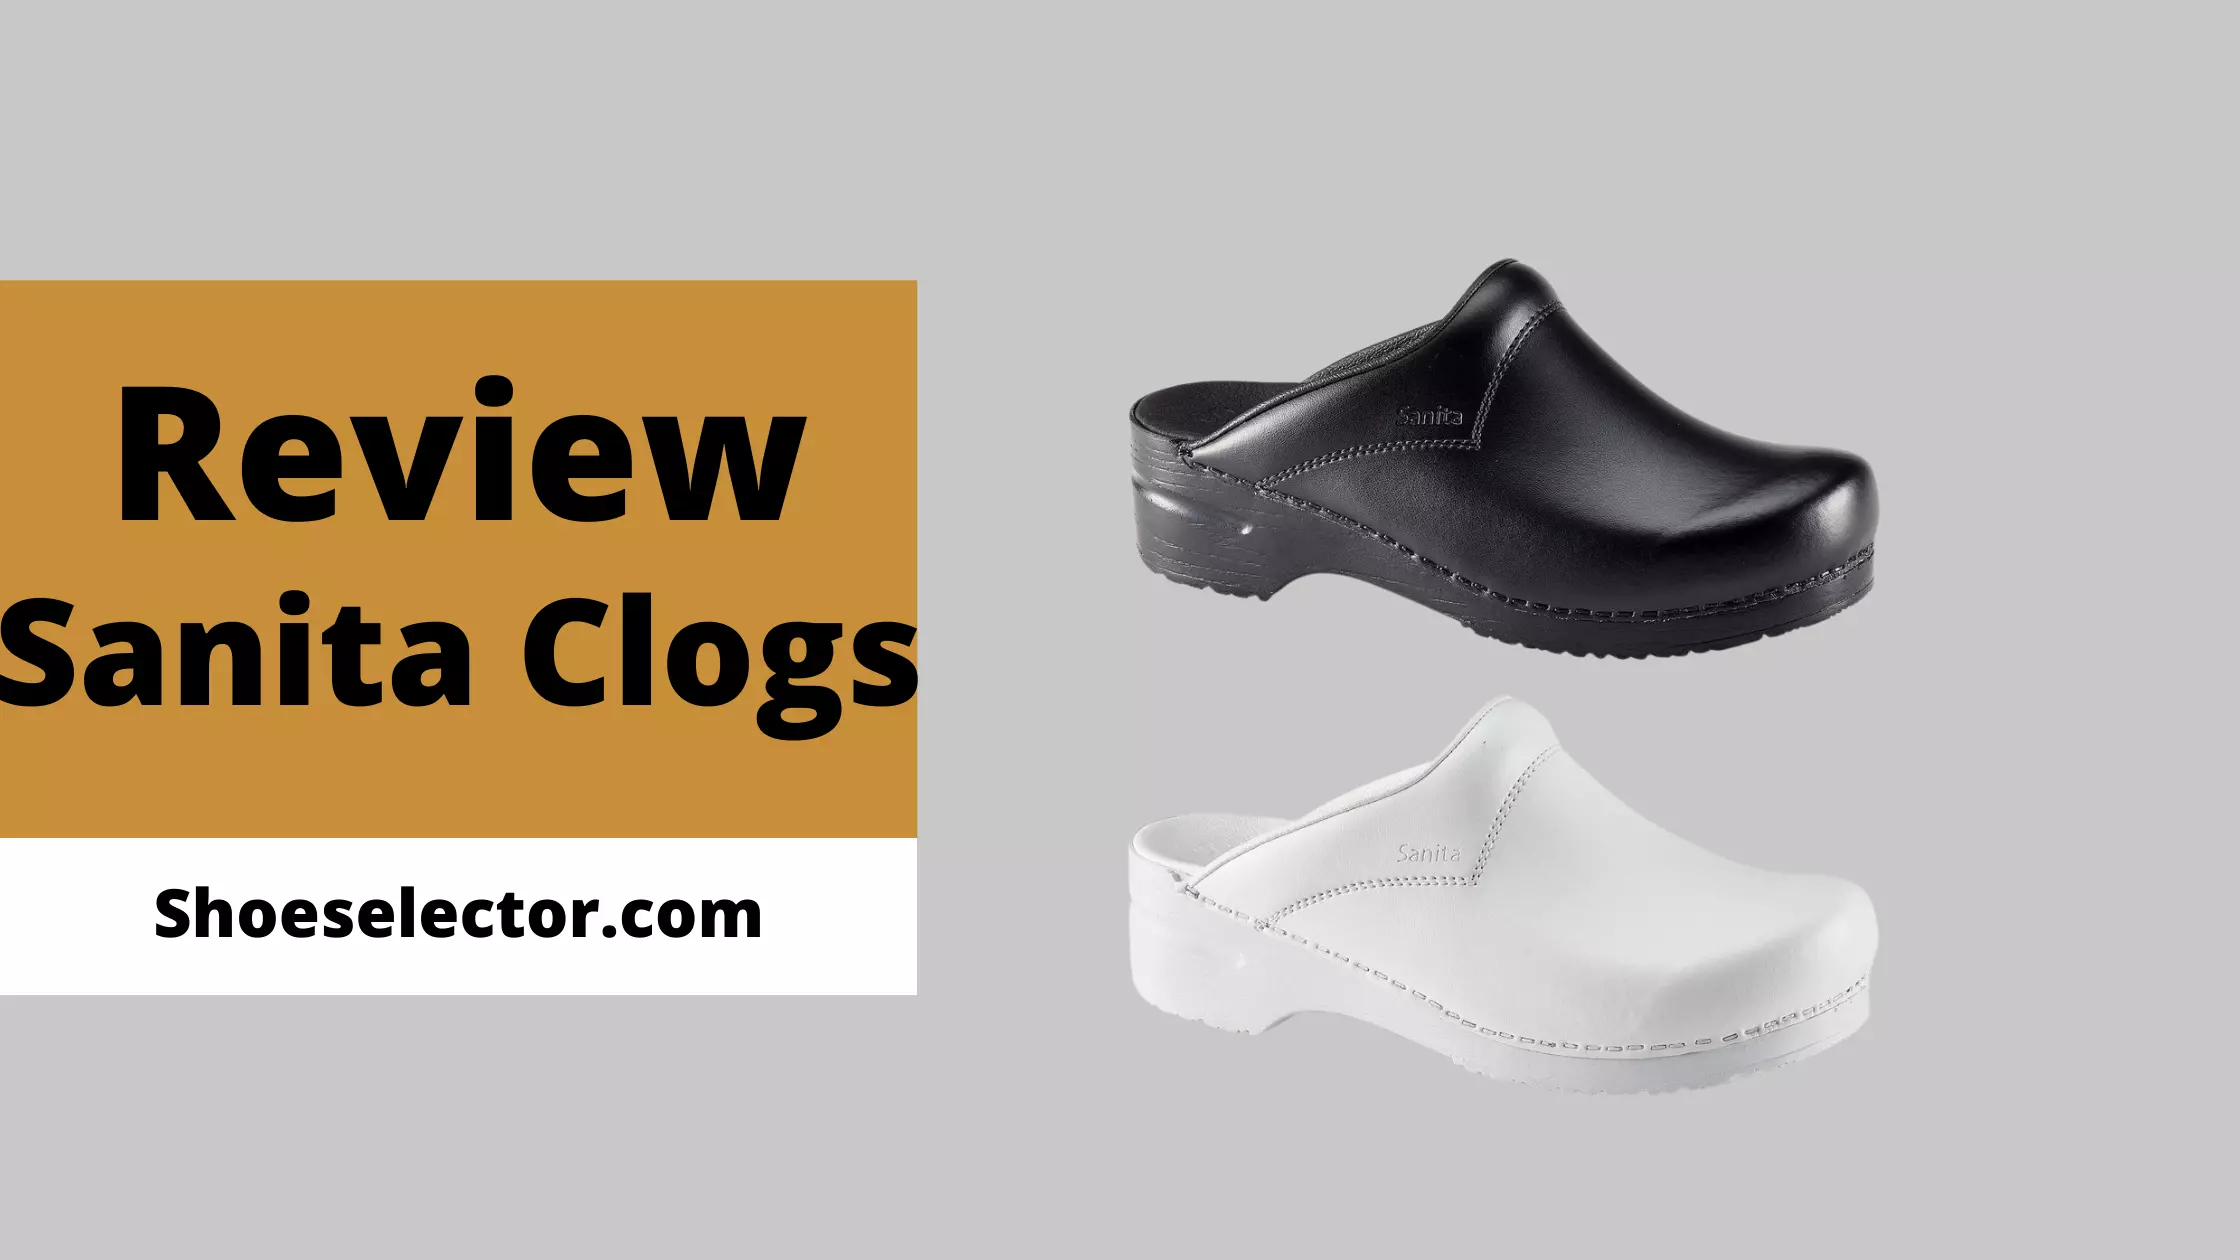 Sanita Clogs Review and Buying Guide